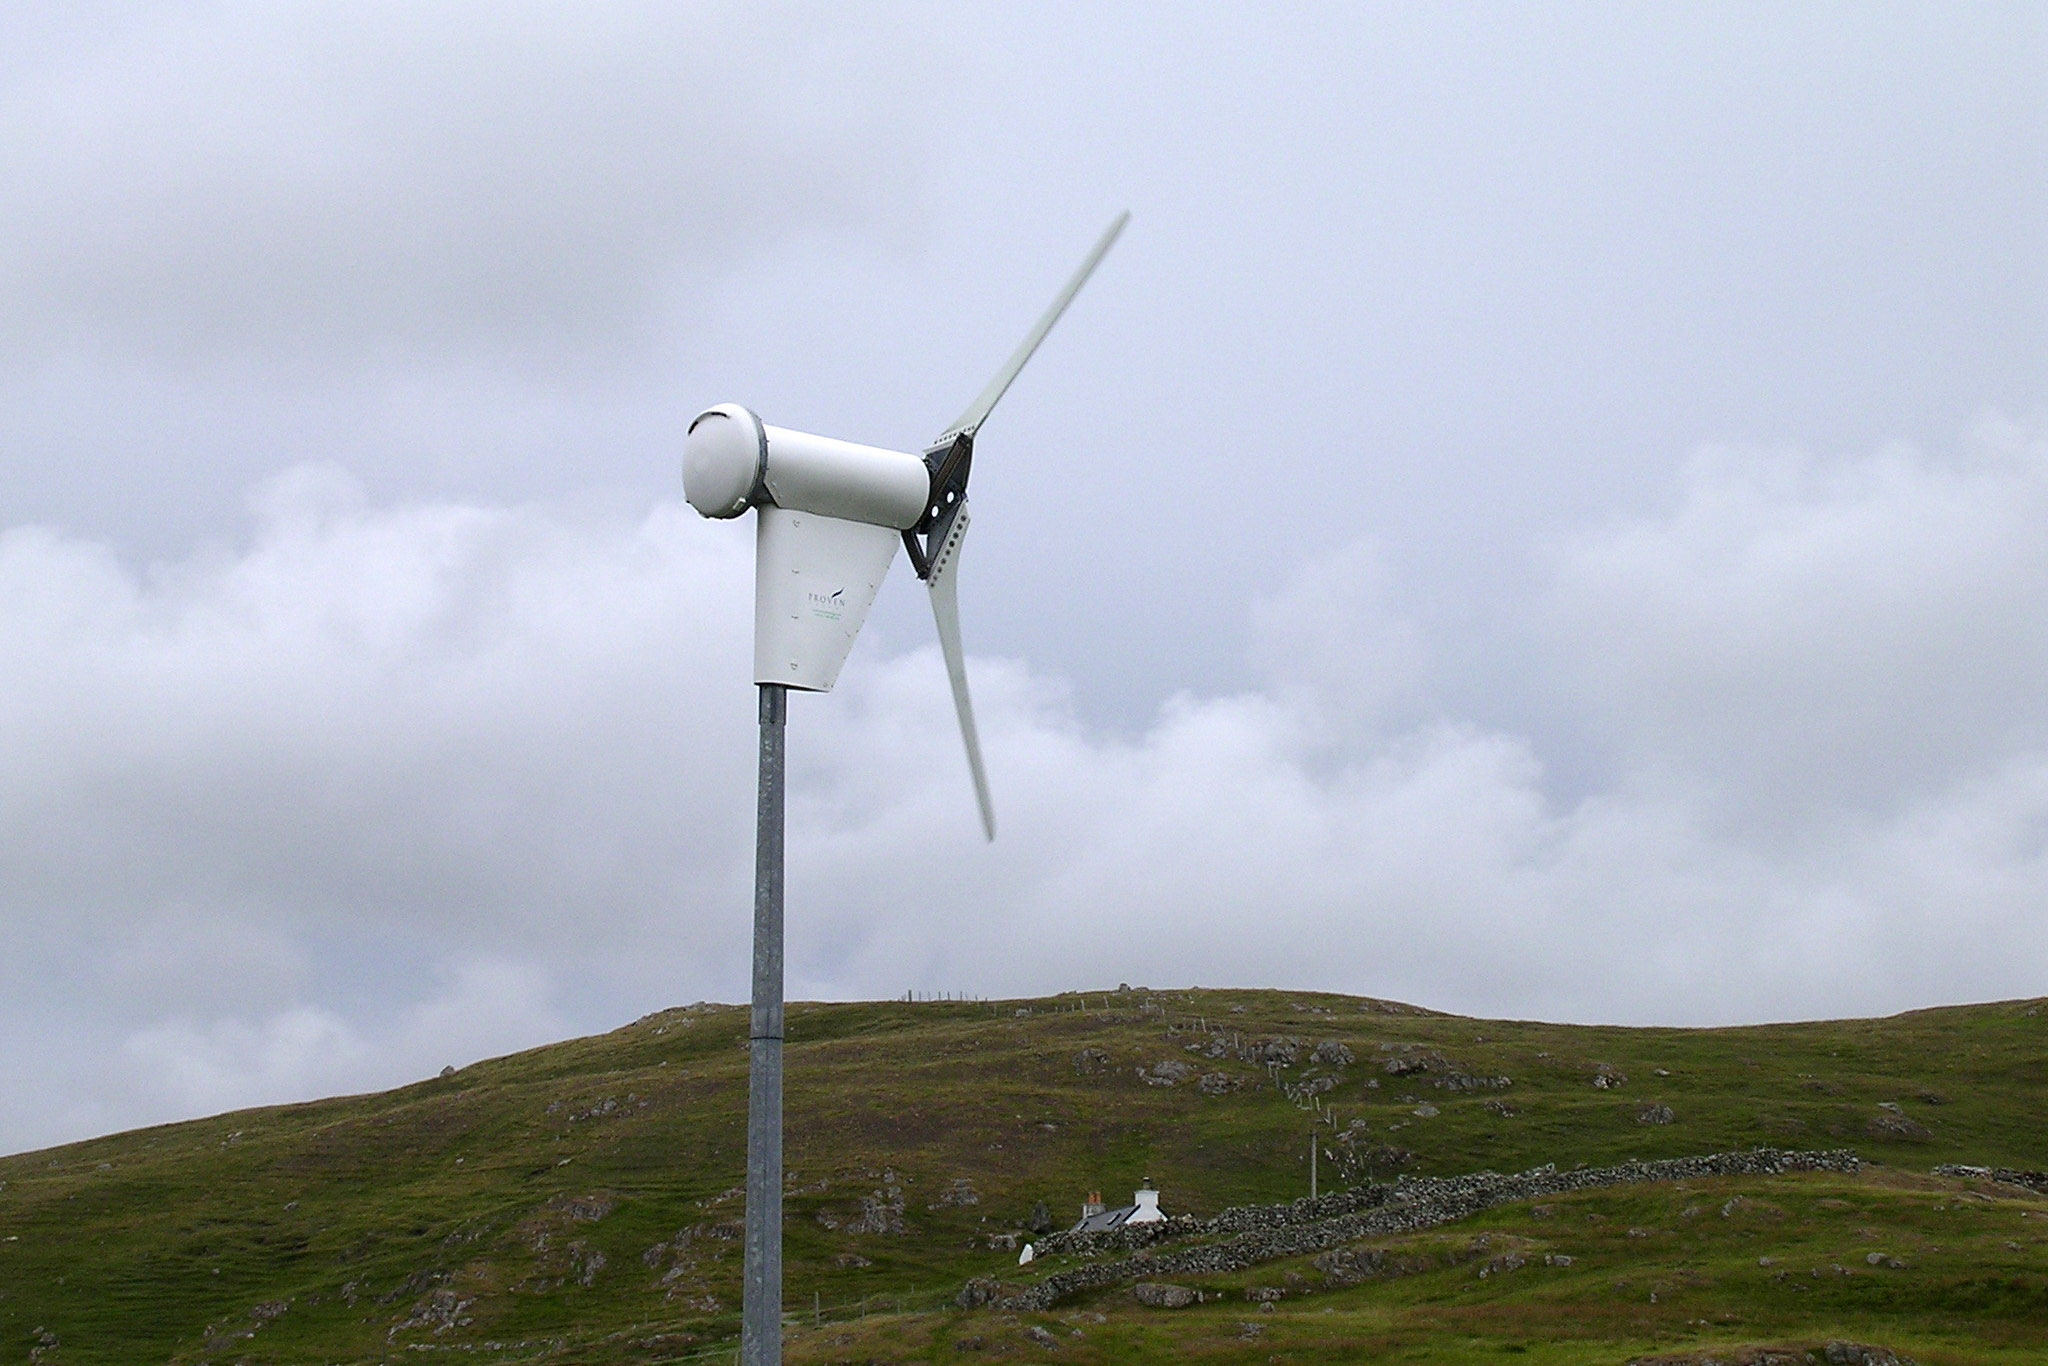 When to Consider a Small Wind Turbine for Your Home